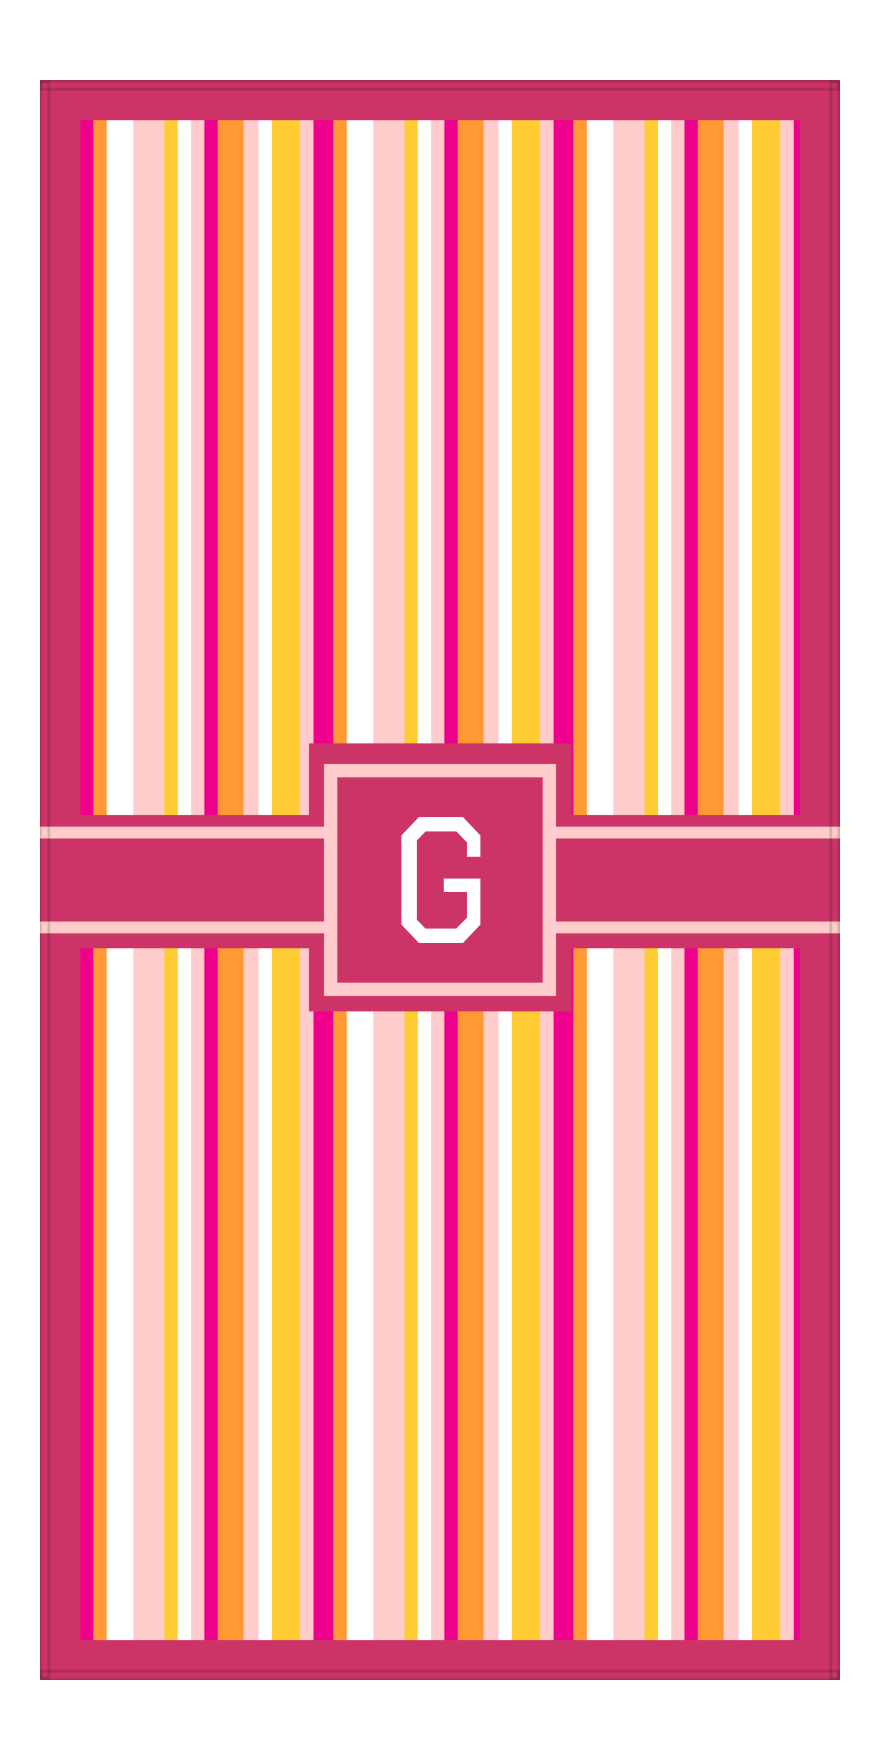 Personalized 5 Color Stripes 3 Repeat Beach Towel - Vertical - Pink and Orange - Square with Ribbon Frame - Front View